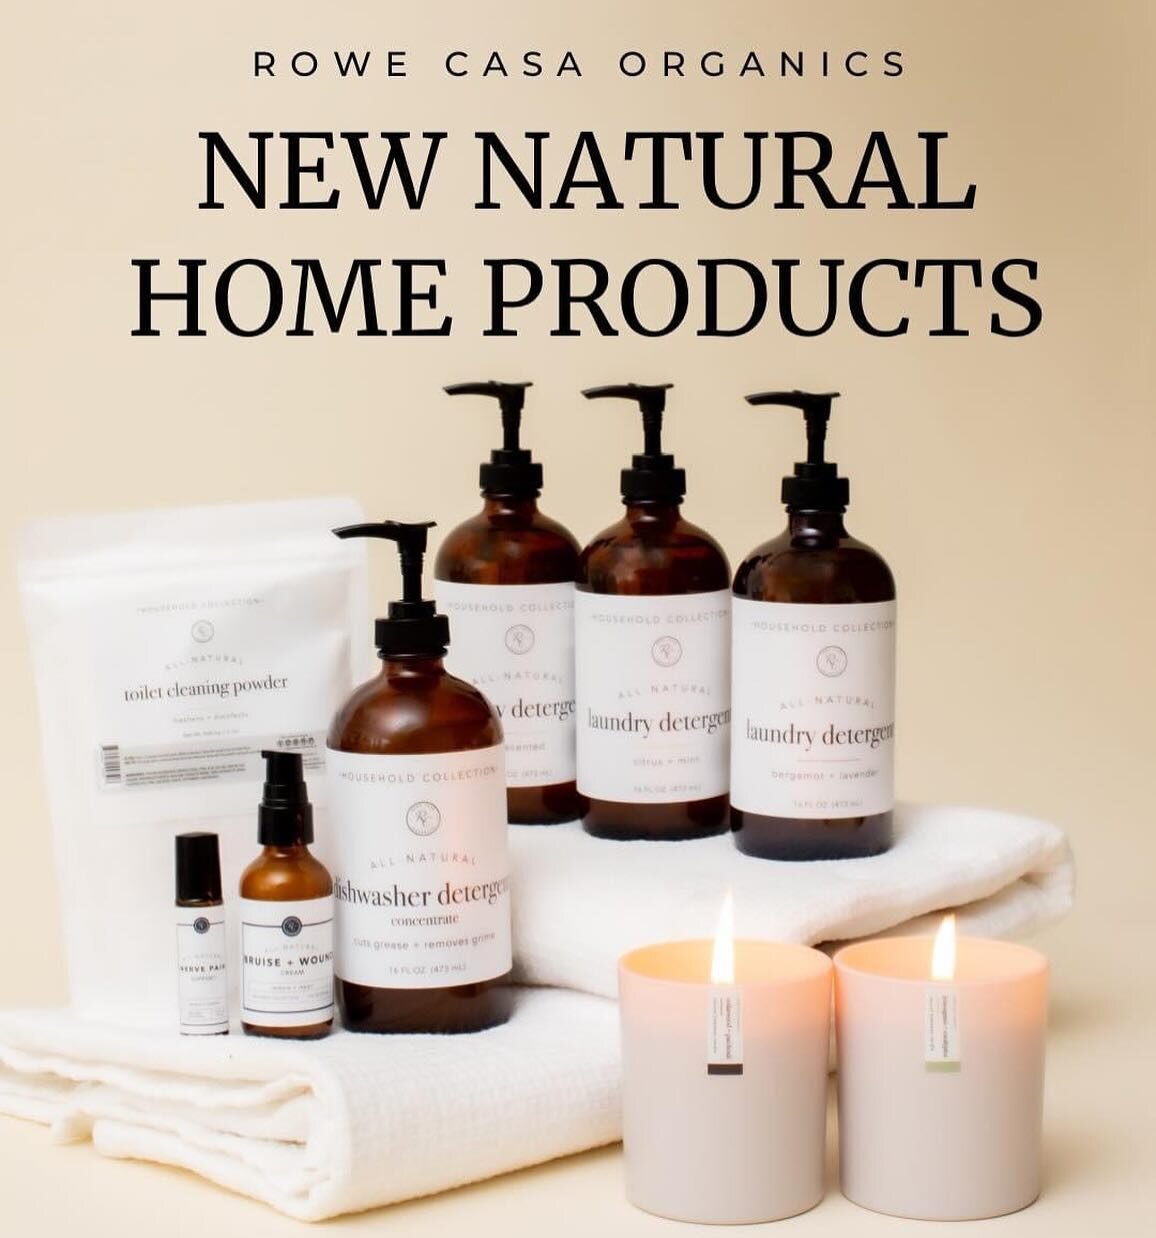 New products for your home are here, and we are beyond excited! 🥳🥳🥳

▫️NEW Dishwasher Detergent
▫️NEW Liquid Laundry Soap
▫️NEW Toilet Cleaning Powder 
▫️NEW Candle Scents
▫️Nerve Pain support ROLLER
▫️Bruise + Wound CREAM

There&rsquo;s no better